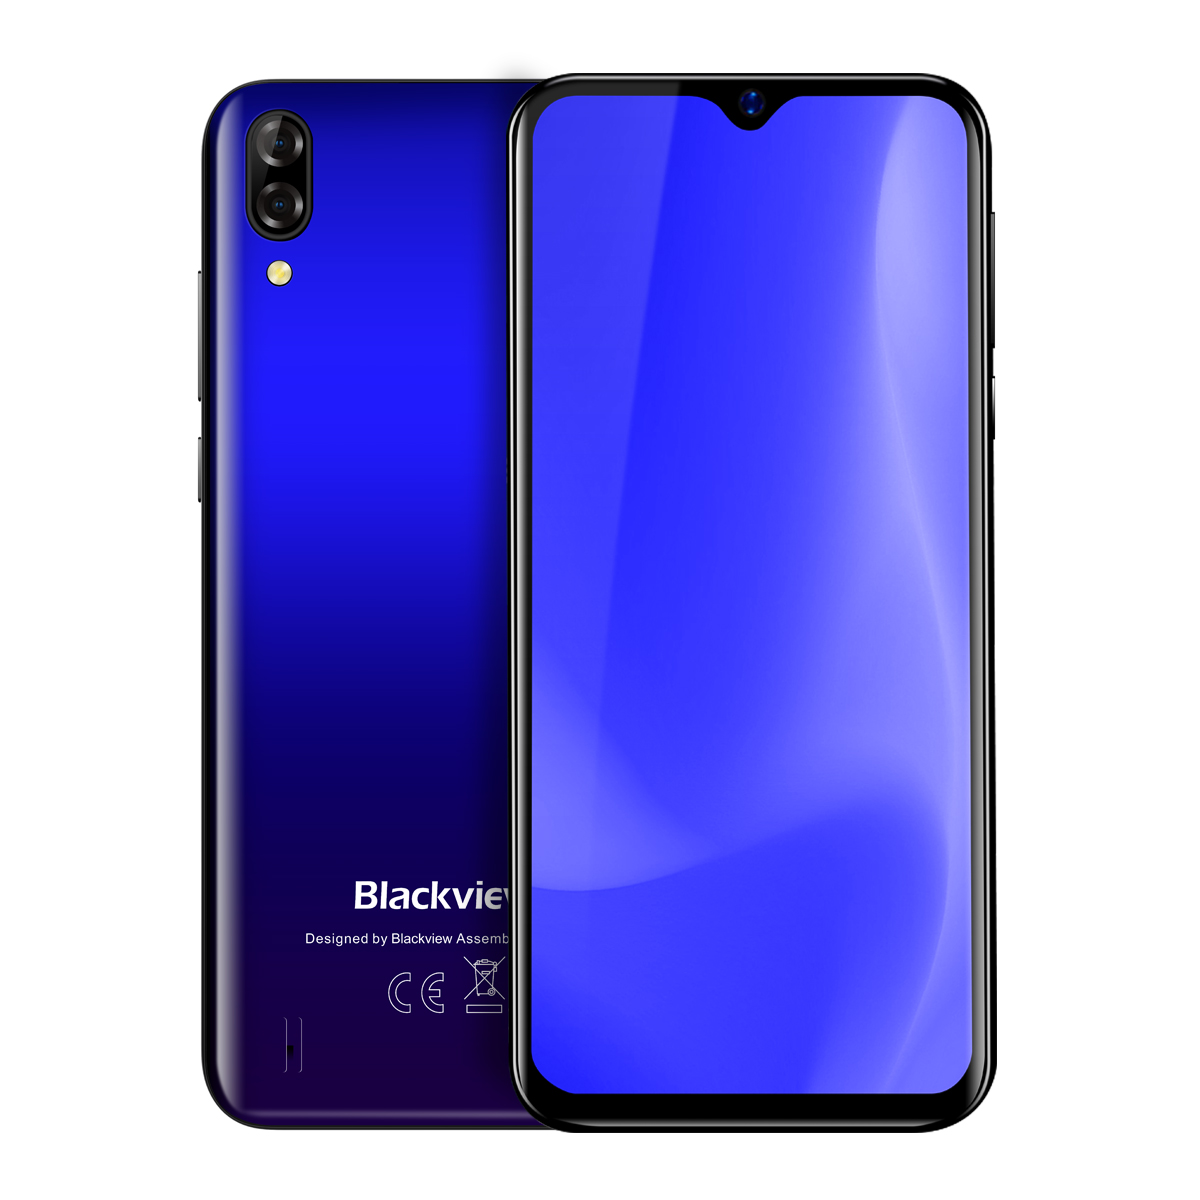 Blackview A60 Smartphone 4080mAh Android 8.1 13MP Dual Camera Cellphone MT6580A Quad core 6.1"Waterdrop Screen Mobile Phone